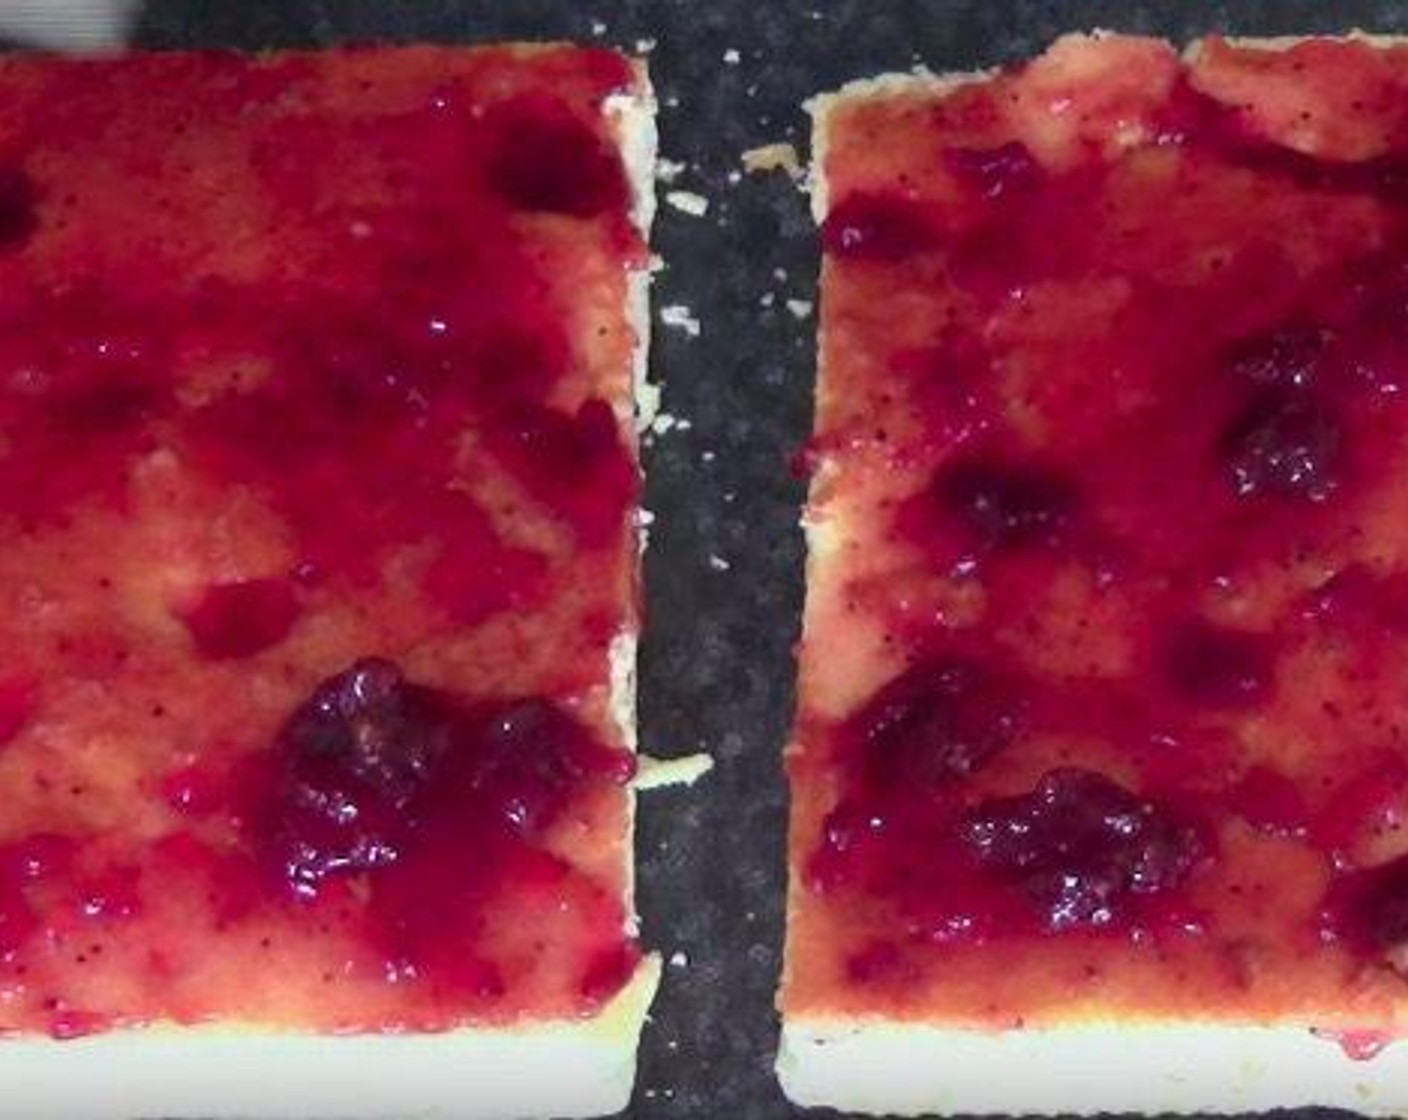 step 1 Slice the Sponge Cake (2) into four pieces. Spread a generous portion of Strawberry Jam (1 cup) onto each one. Place the top of the sponge cake on top and use a sharp knife to cut them into squares. Set aside